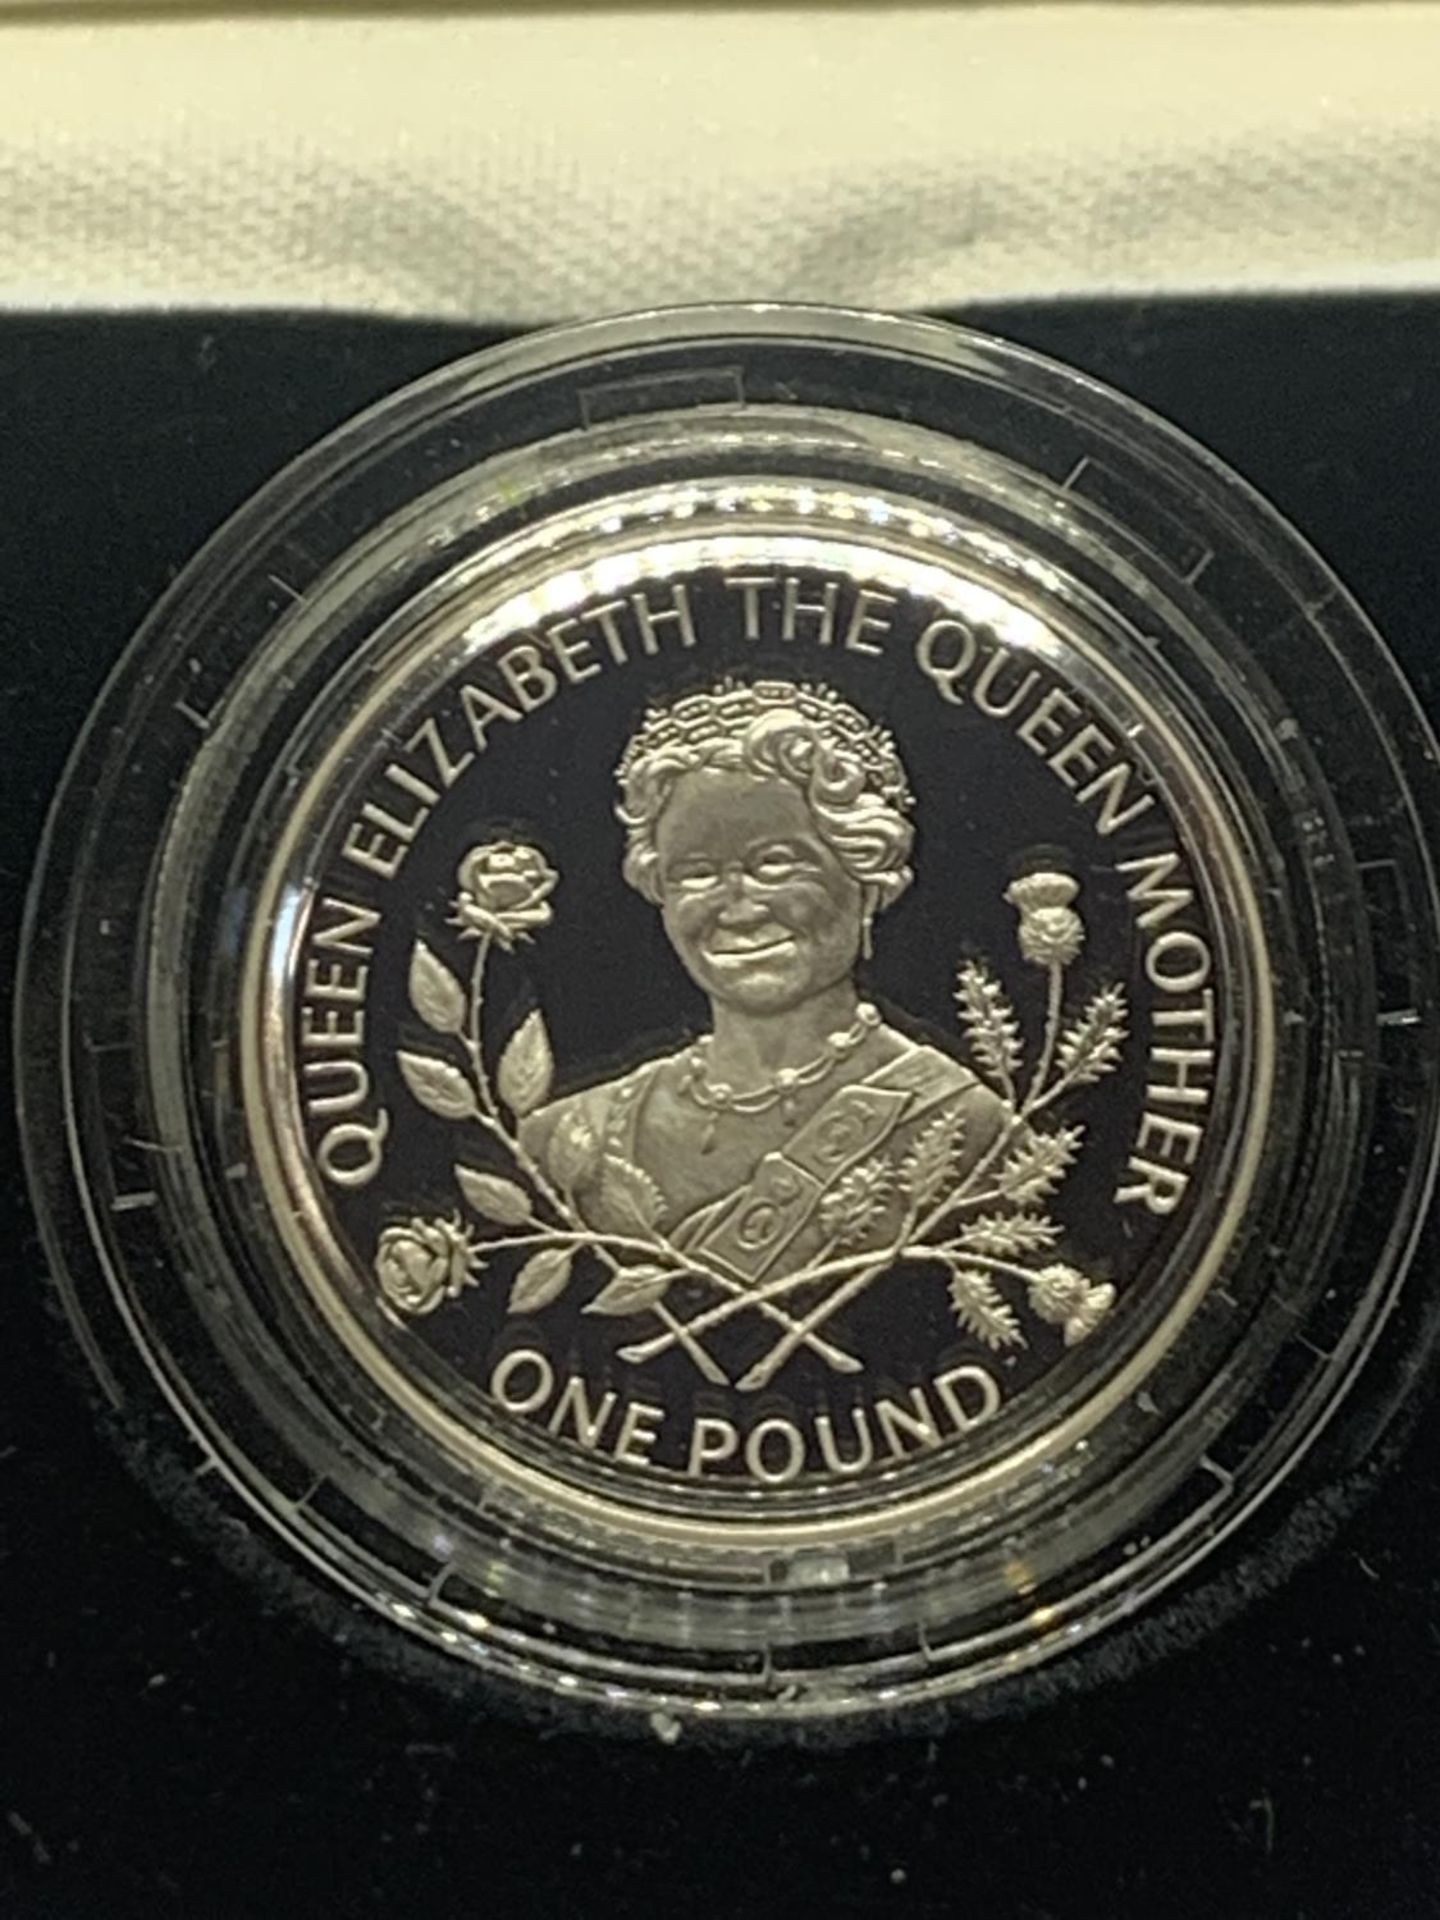 A BOXED SILVER ONE POUND PROOF COIN 1995 ELIZABETH II BAILIWICK OF GUERNSEY - Image 3 of 3